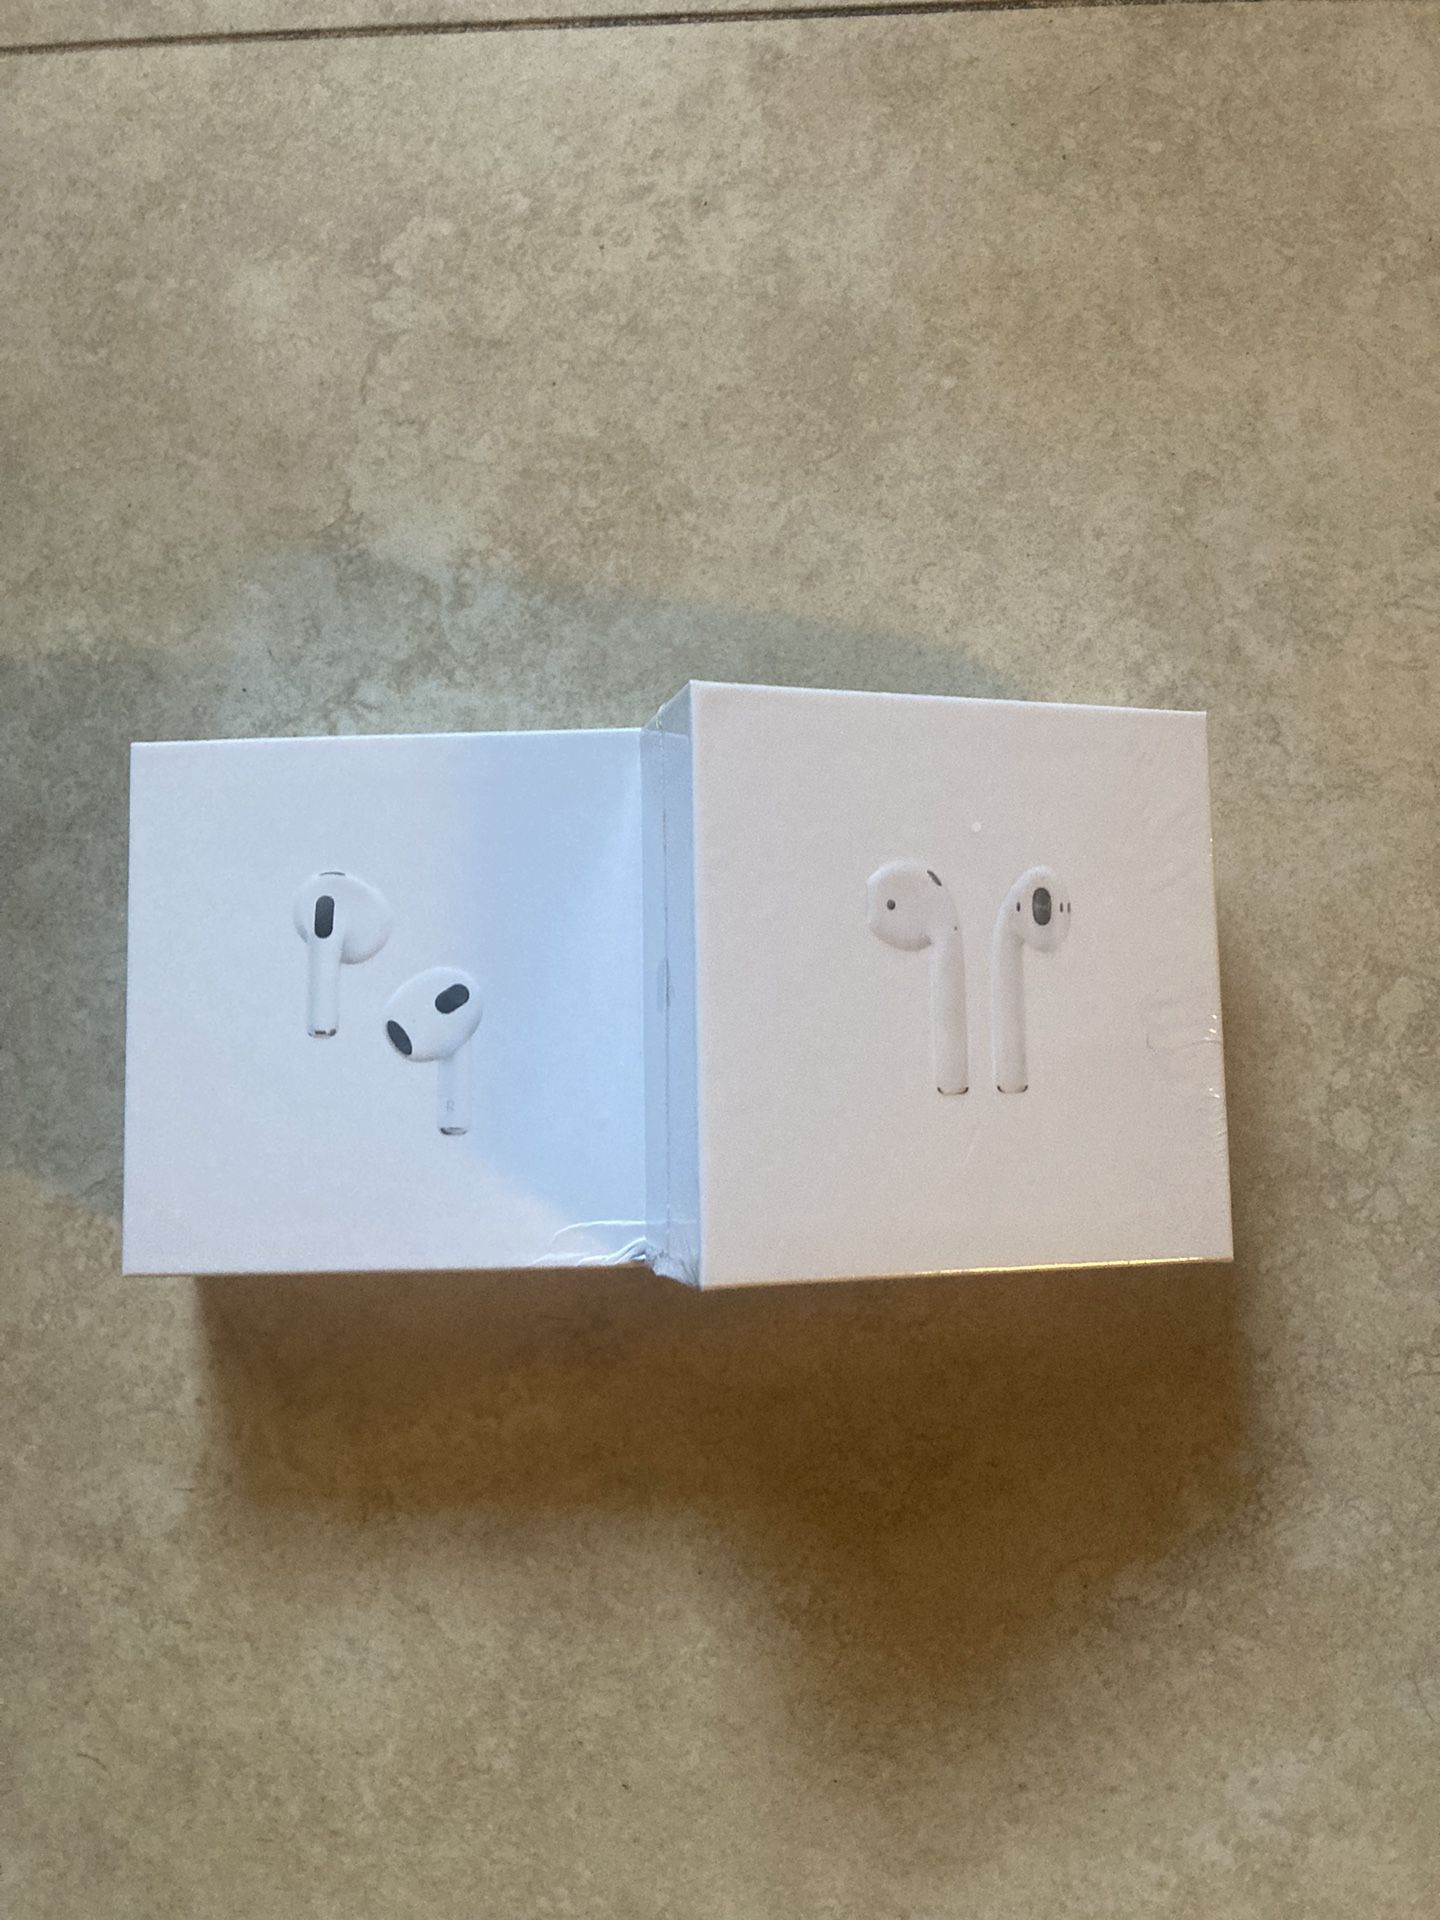 AirPods Generation 3( Comes With Free AirPods)